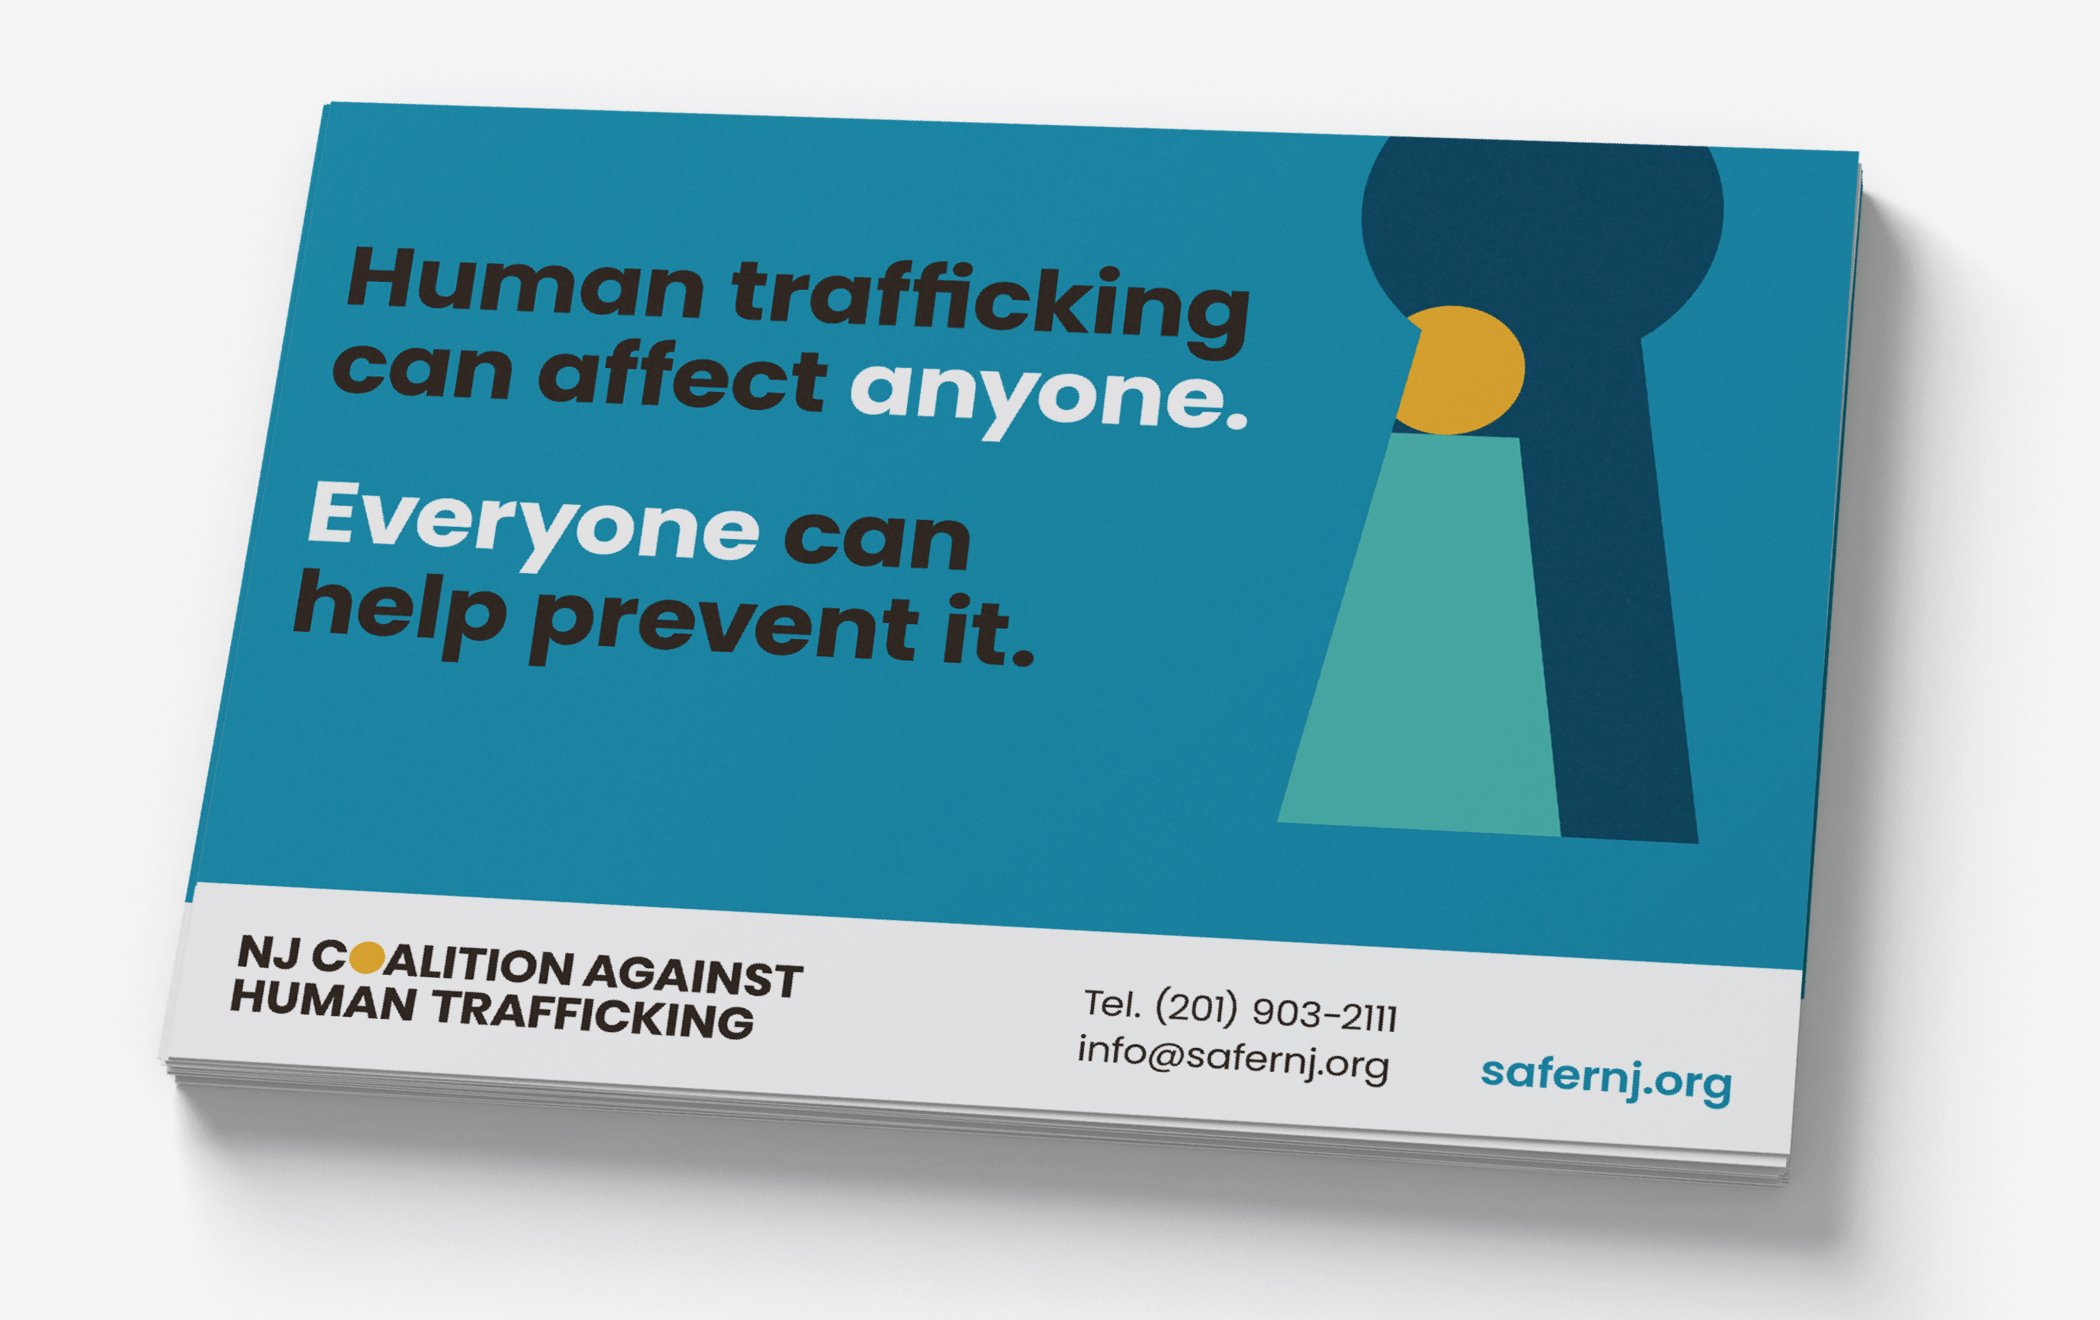 NJ Coalition Against Human Trafficking postcard of RED FLAGS warning that someone might be a victim of trafficking.